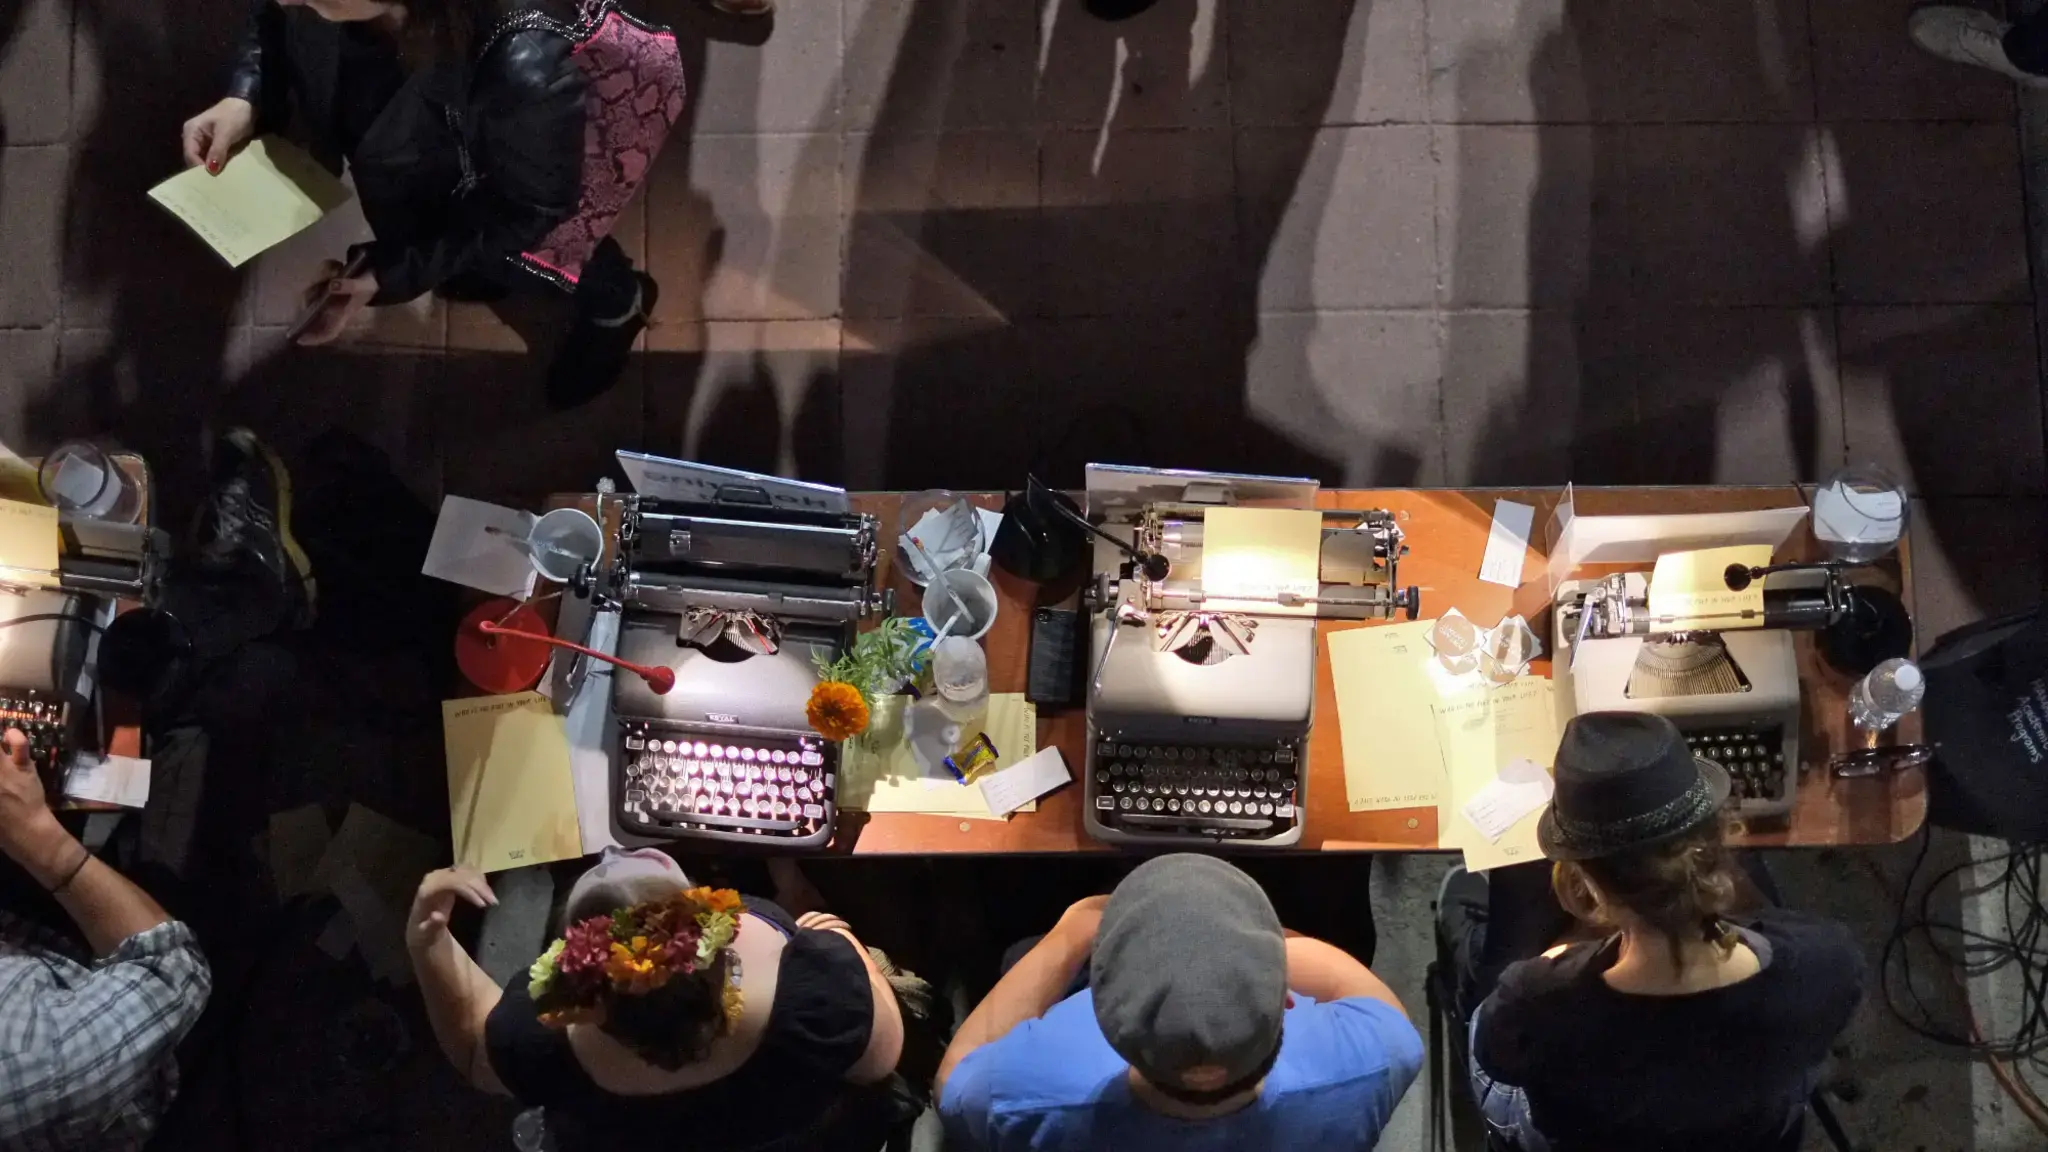 A &ldquo;Poetry Bureau,&rdquo; created by the Center for the Art of Performance at UCLA, Westwood Village, 2013. Featuring a group of volunteer poets who write a spontaneous verse for visitors, the bureau appears outside the theater prior to a related performance. Photo by Phinn Sriployrung&nbsp;